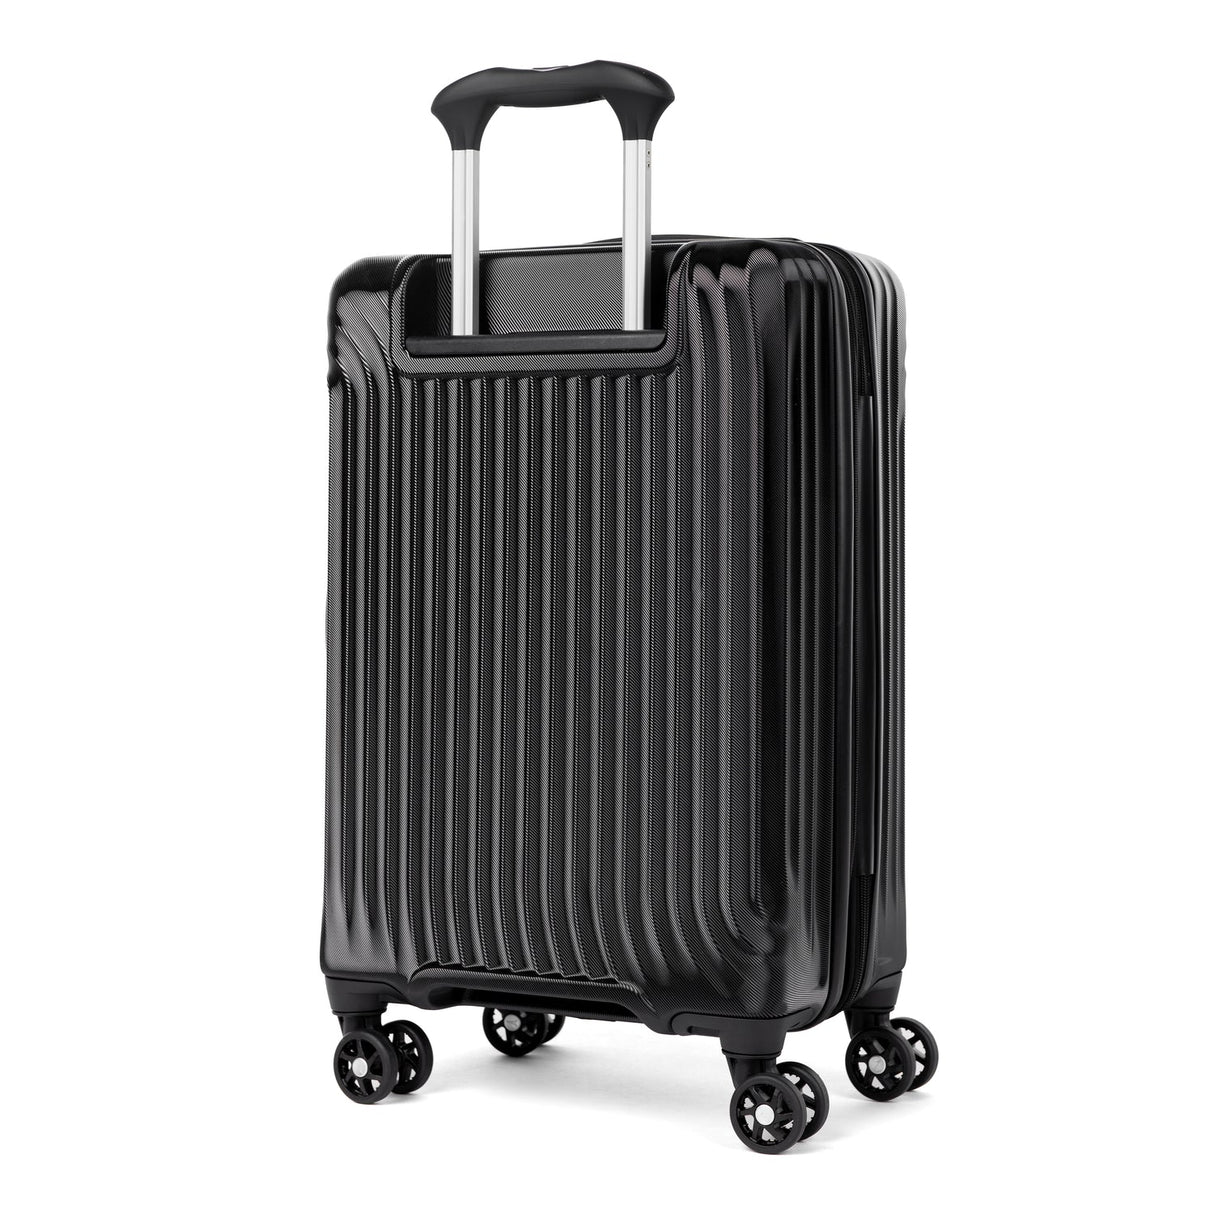 Travelpro Maxlite Air Carry-On Expandable Hardside Spinner , , 401229101_back-1500x1500-d707c29_1024x1024_2x_ce0bd148-92f4-43d6-ade3-4dadaecad4da